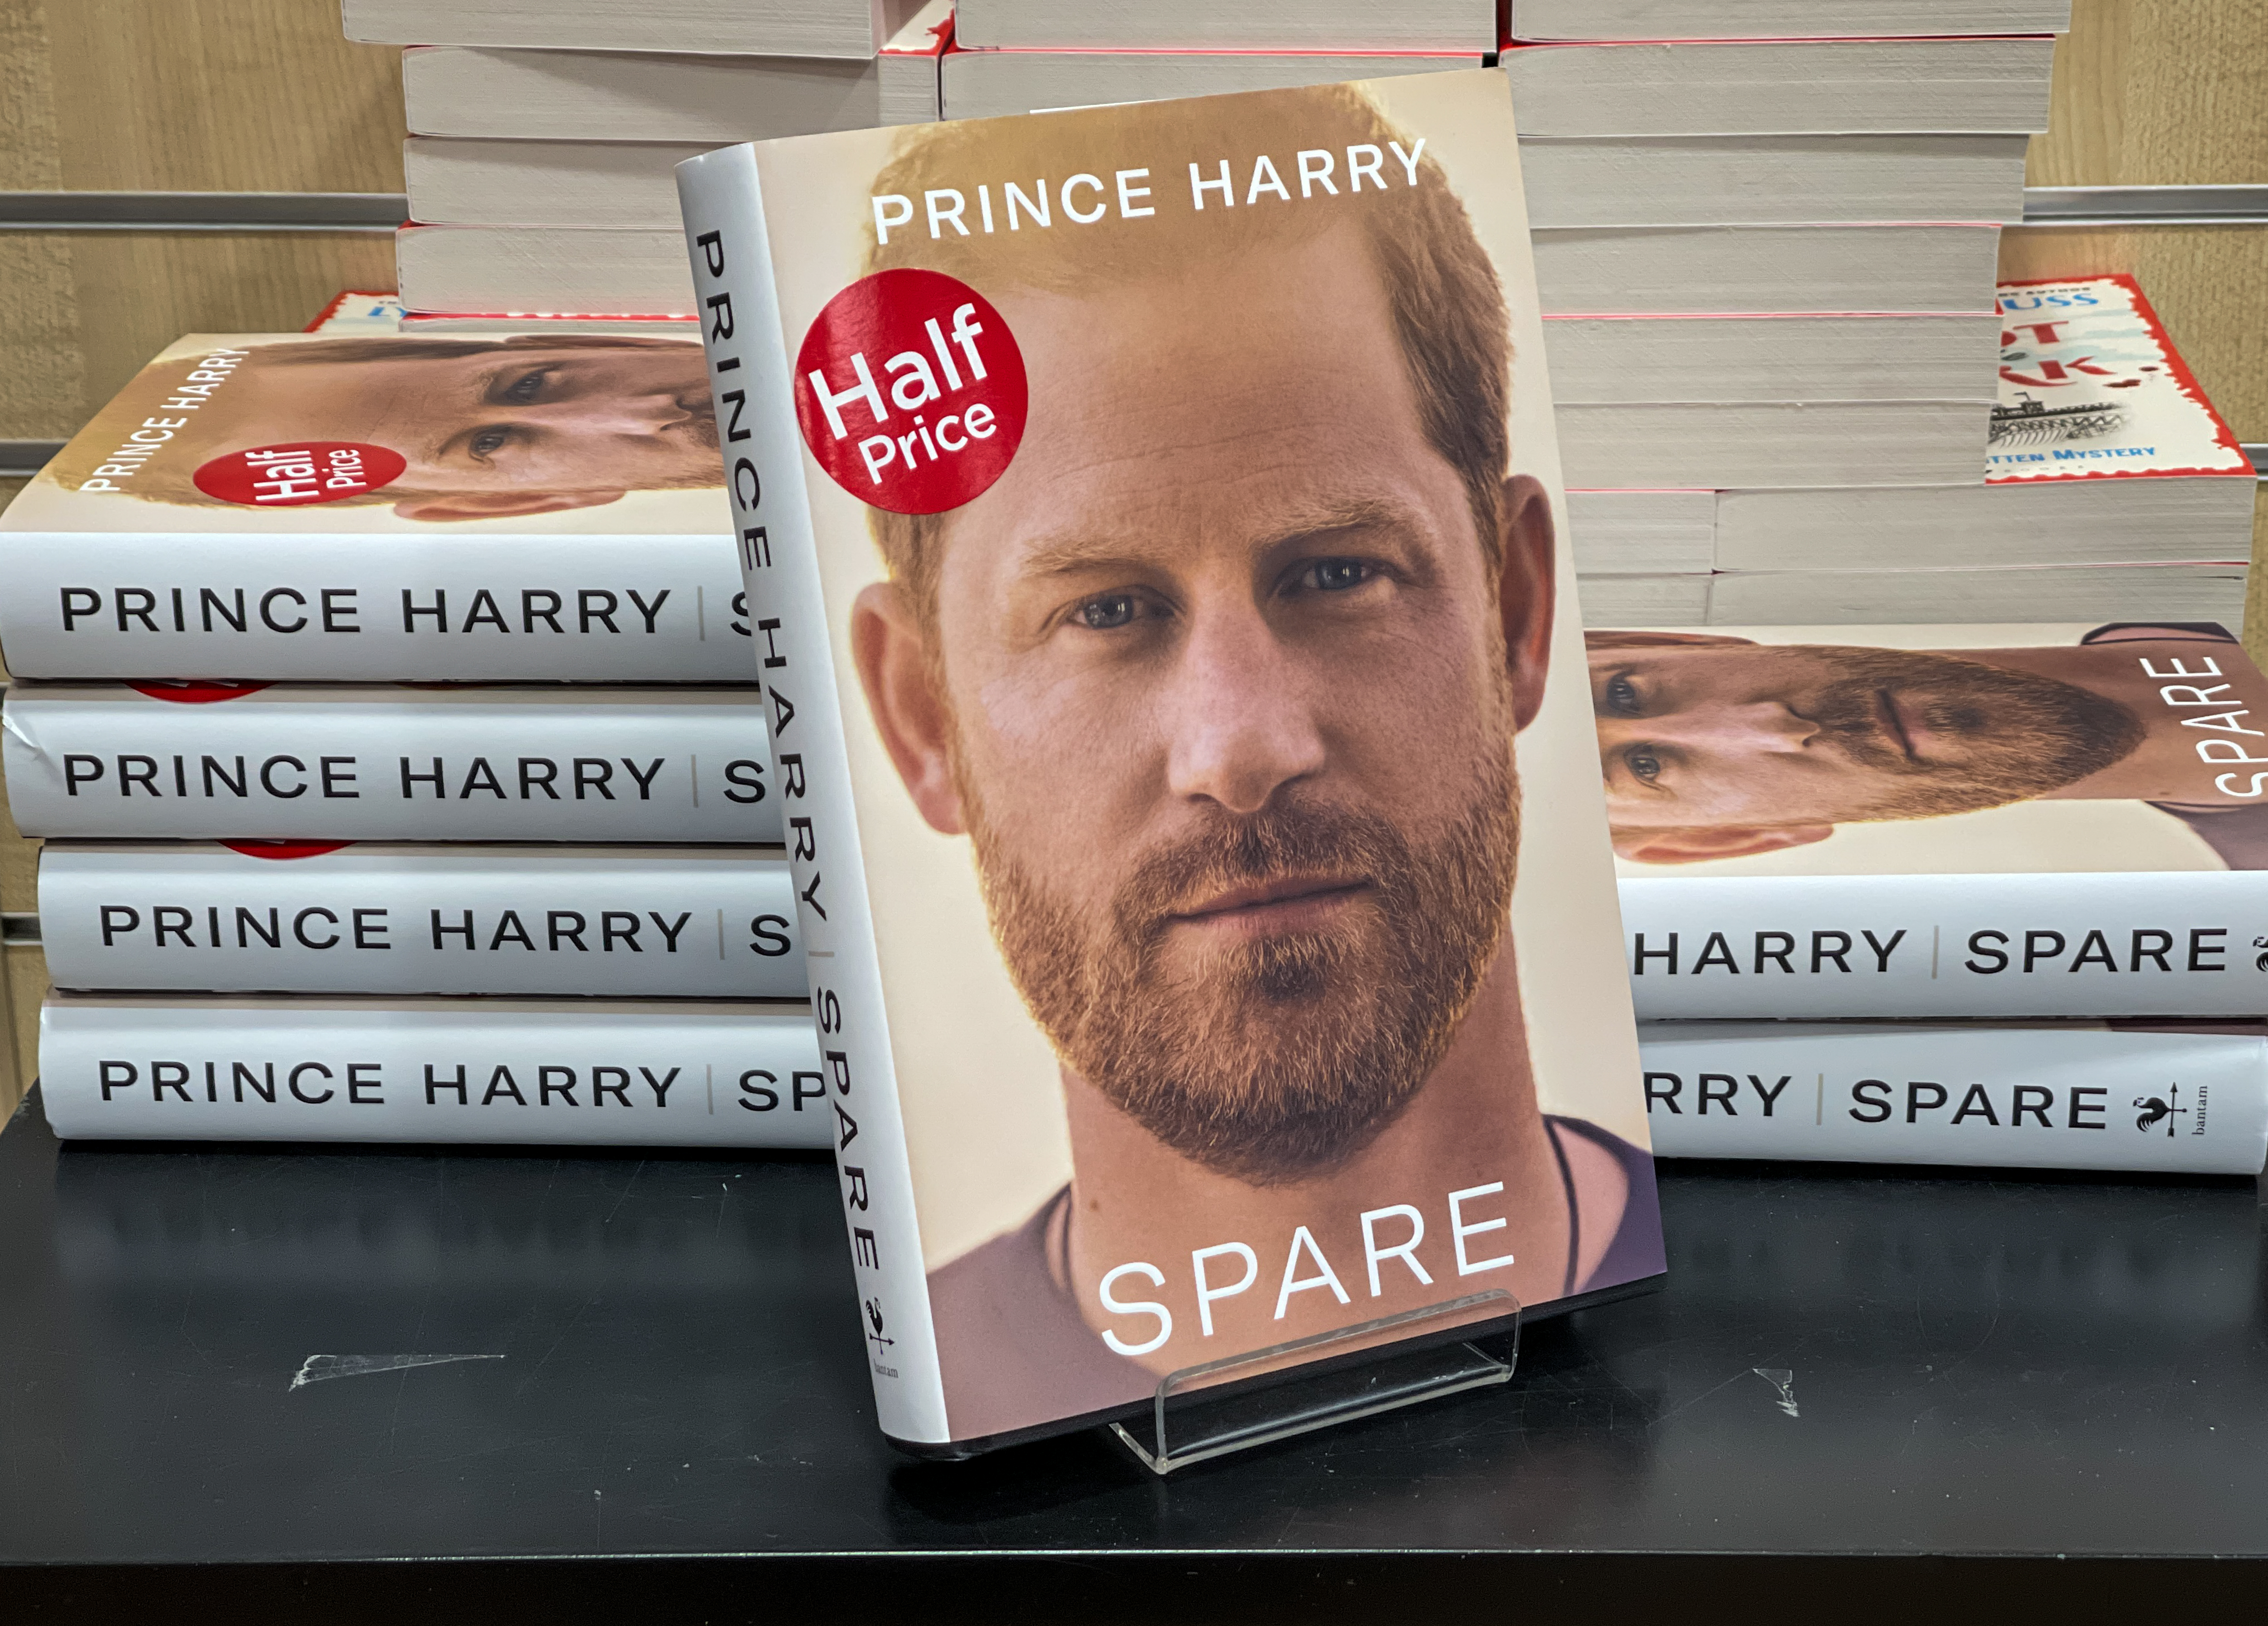 Prince Harry Memoir ‘Spare’ Continues To Make Headlines Following Official Release